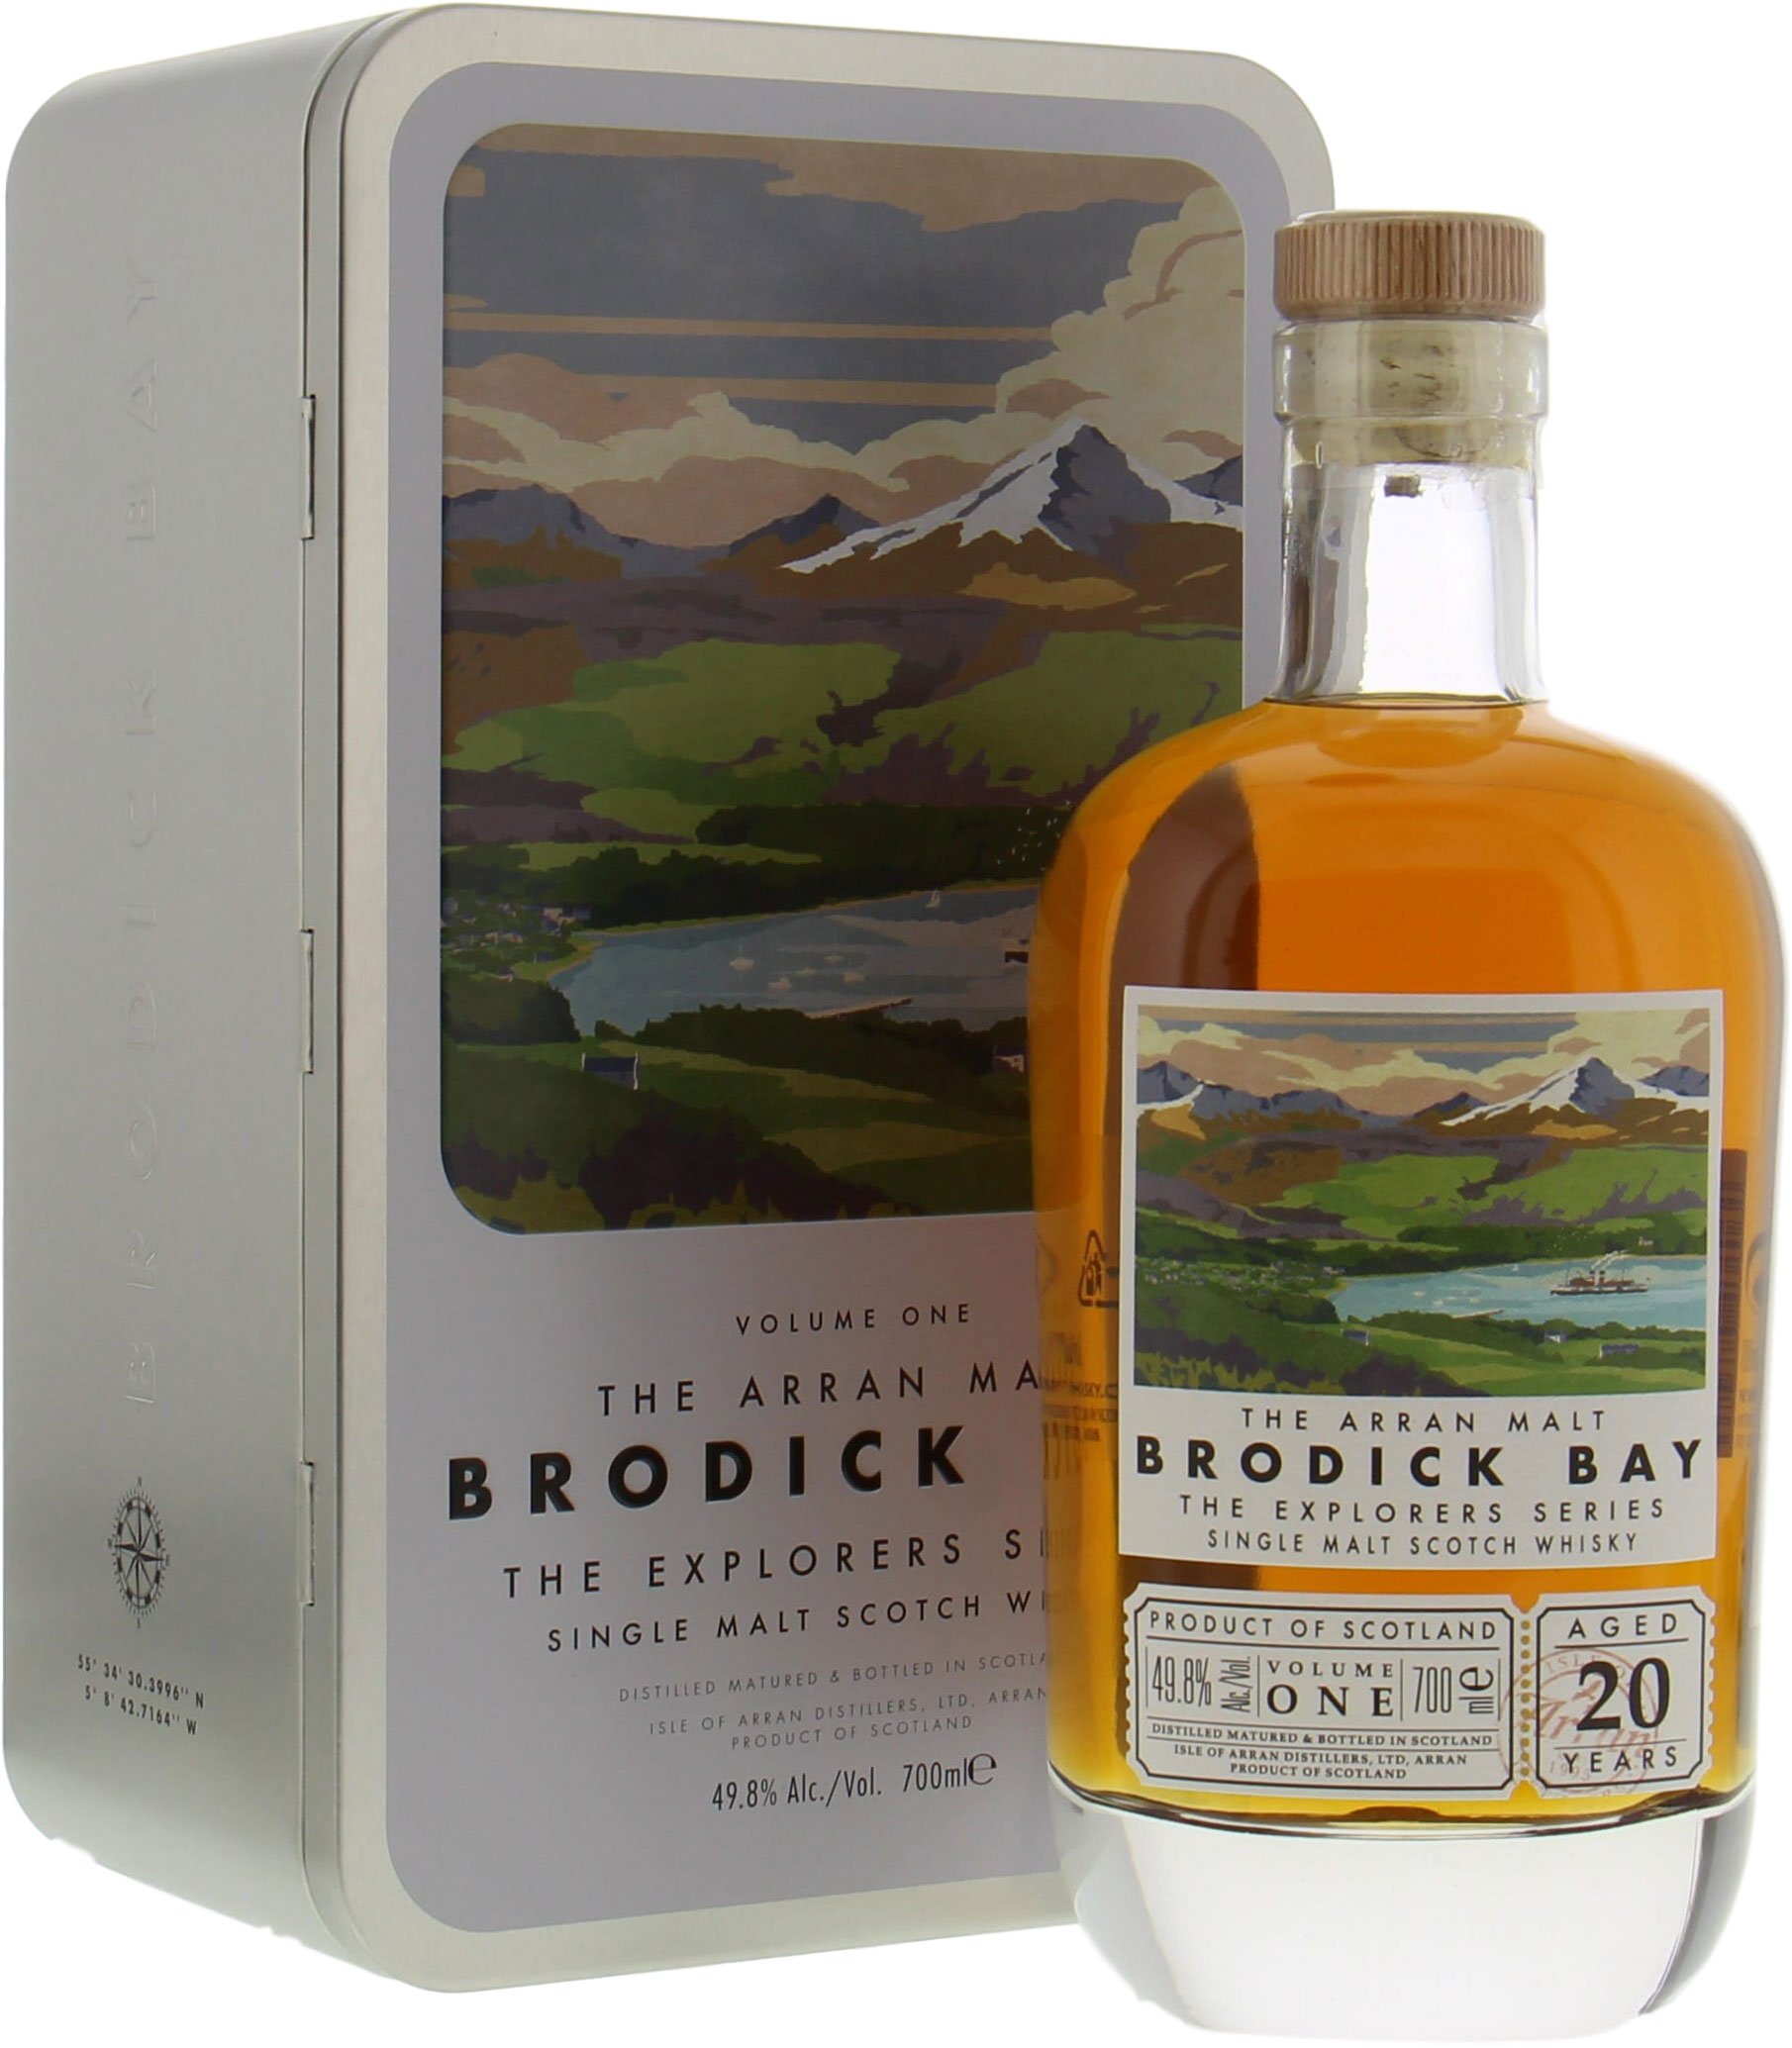 Arran - The Explorer Series Brodick Bay 20 Years Old 49.8% NV In Original Container